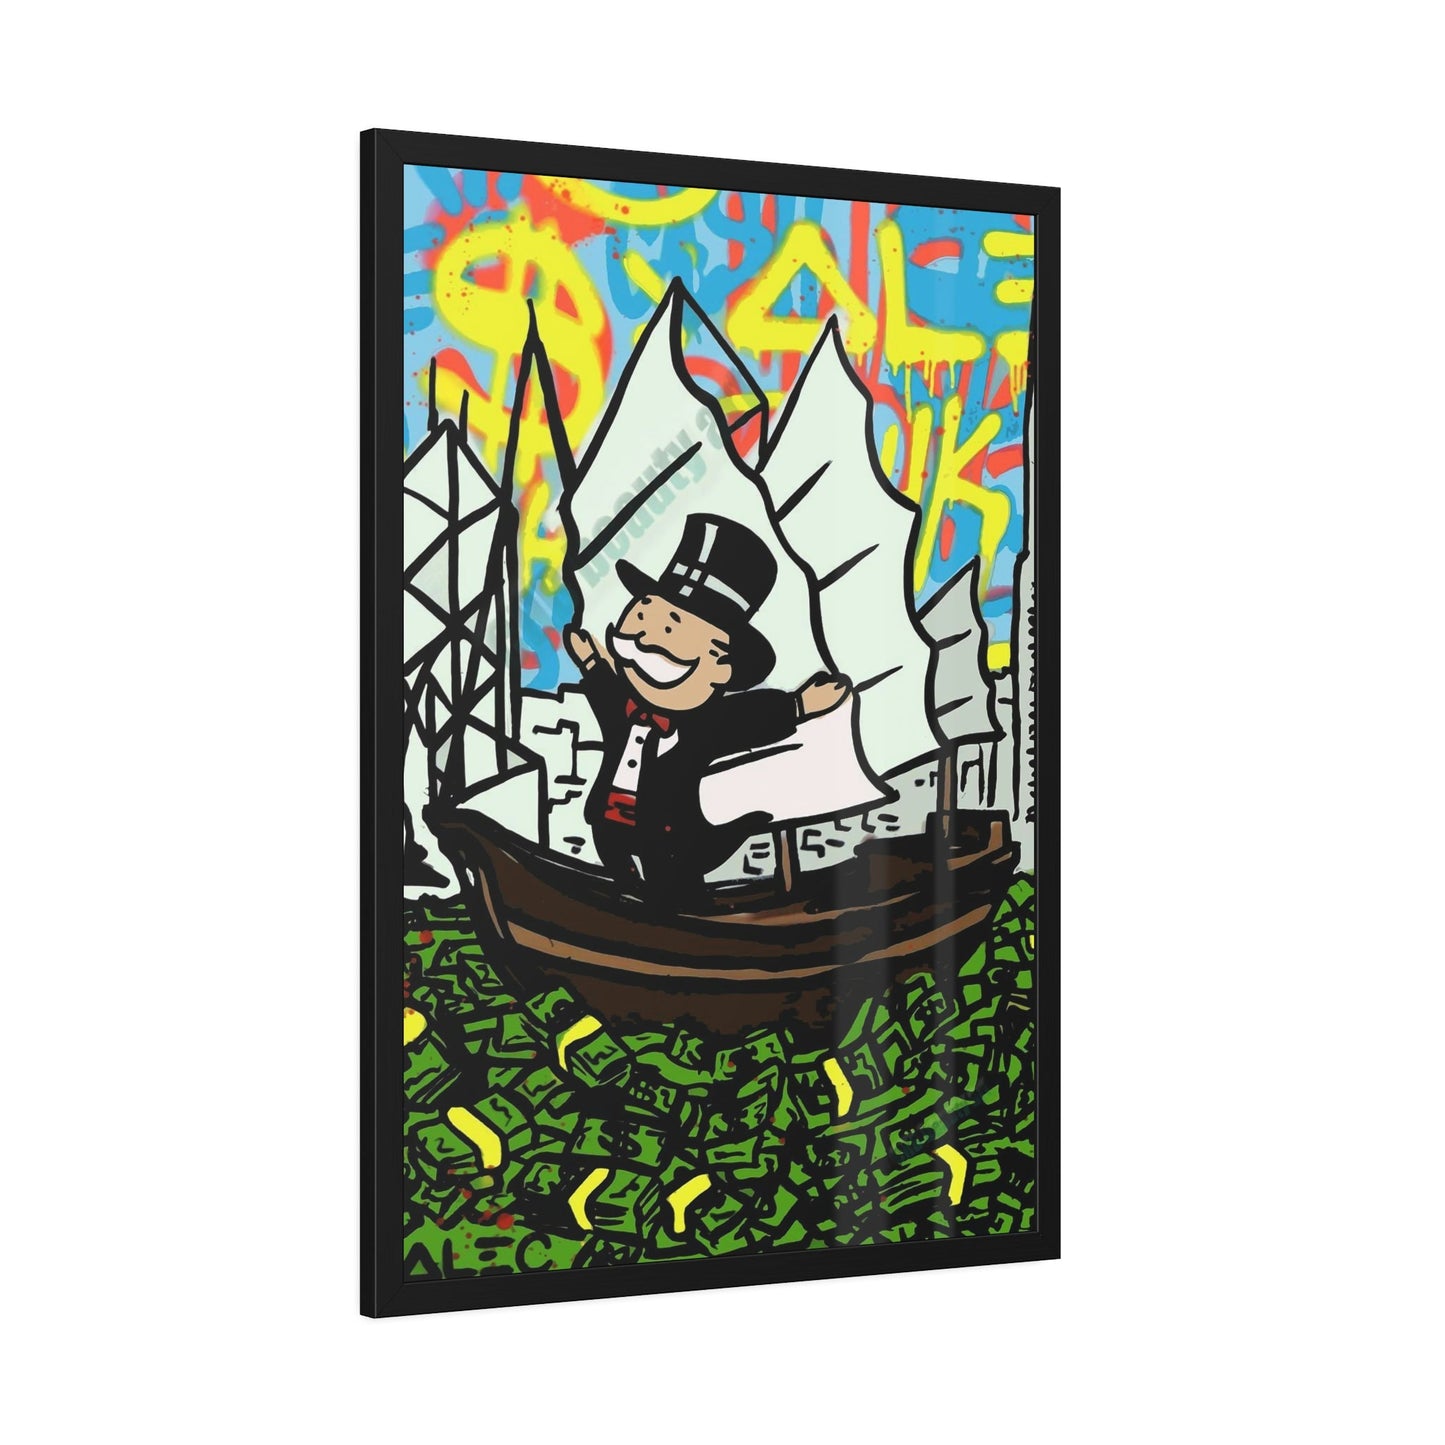 Playful Creativity: Artful Canvas and Poster Print of Alec Monopoly's Art